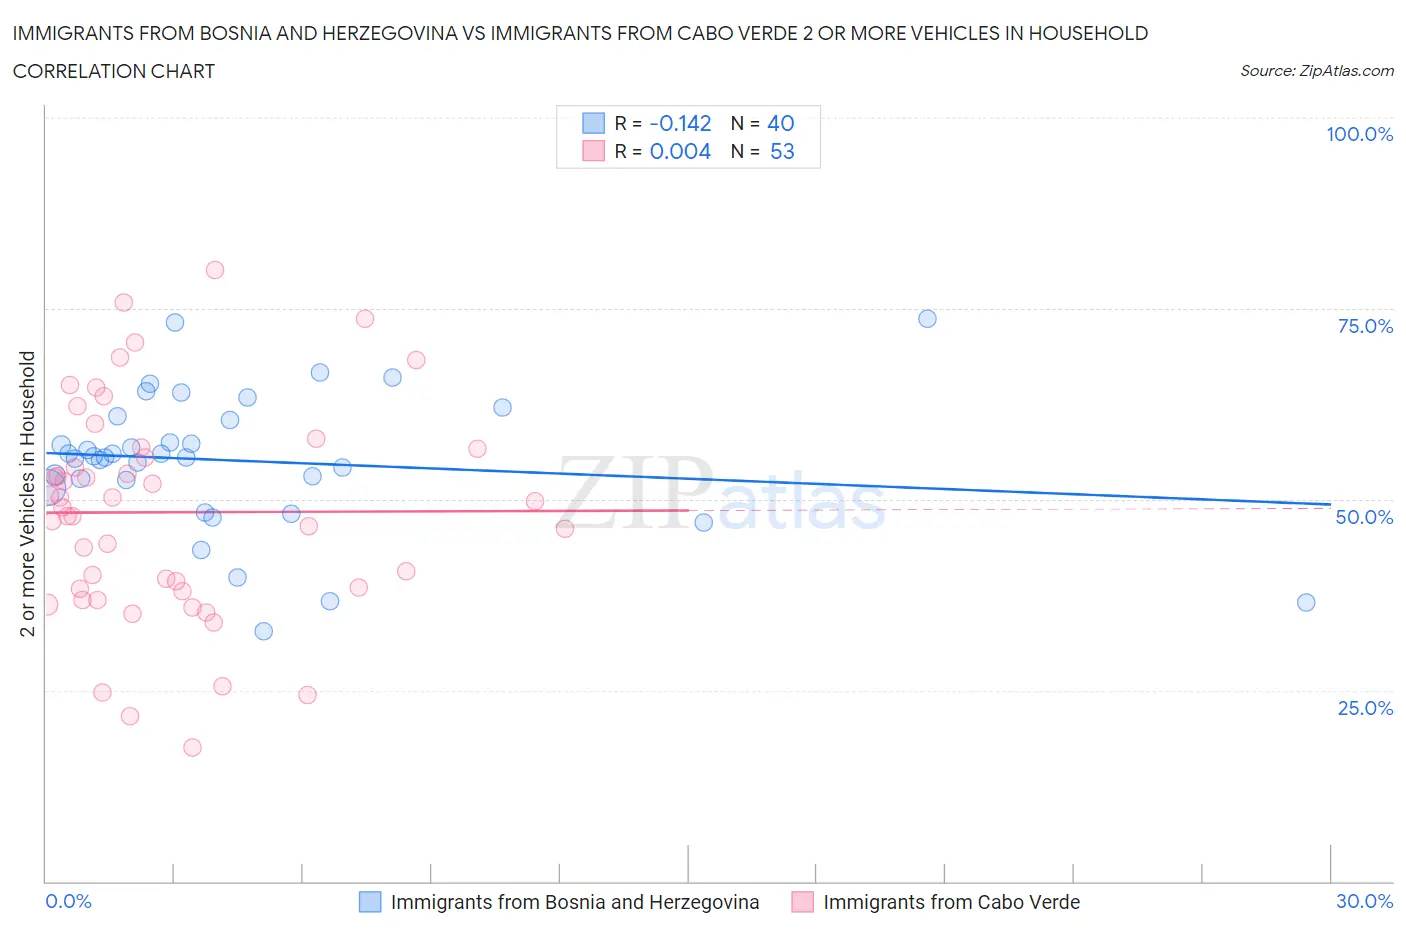 Immigrants from Bosnia and Herzegovina vs Immigrants from Cabo Verde 2 or more Vehicles in Household